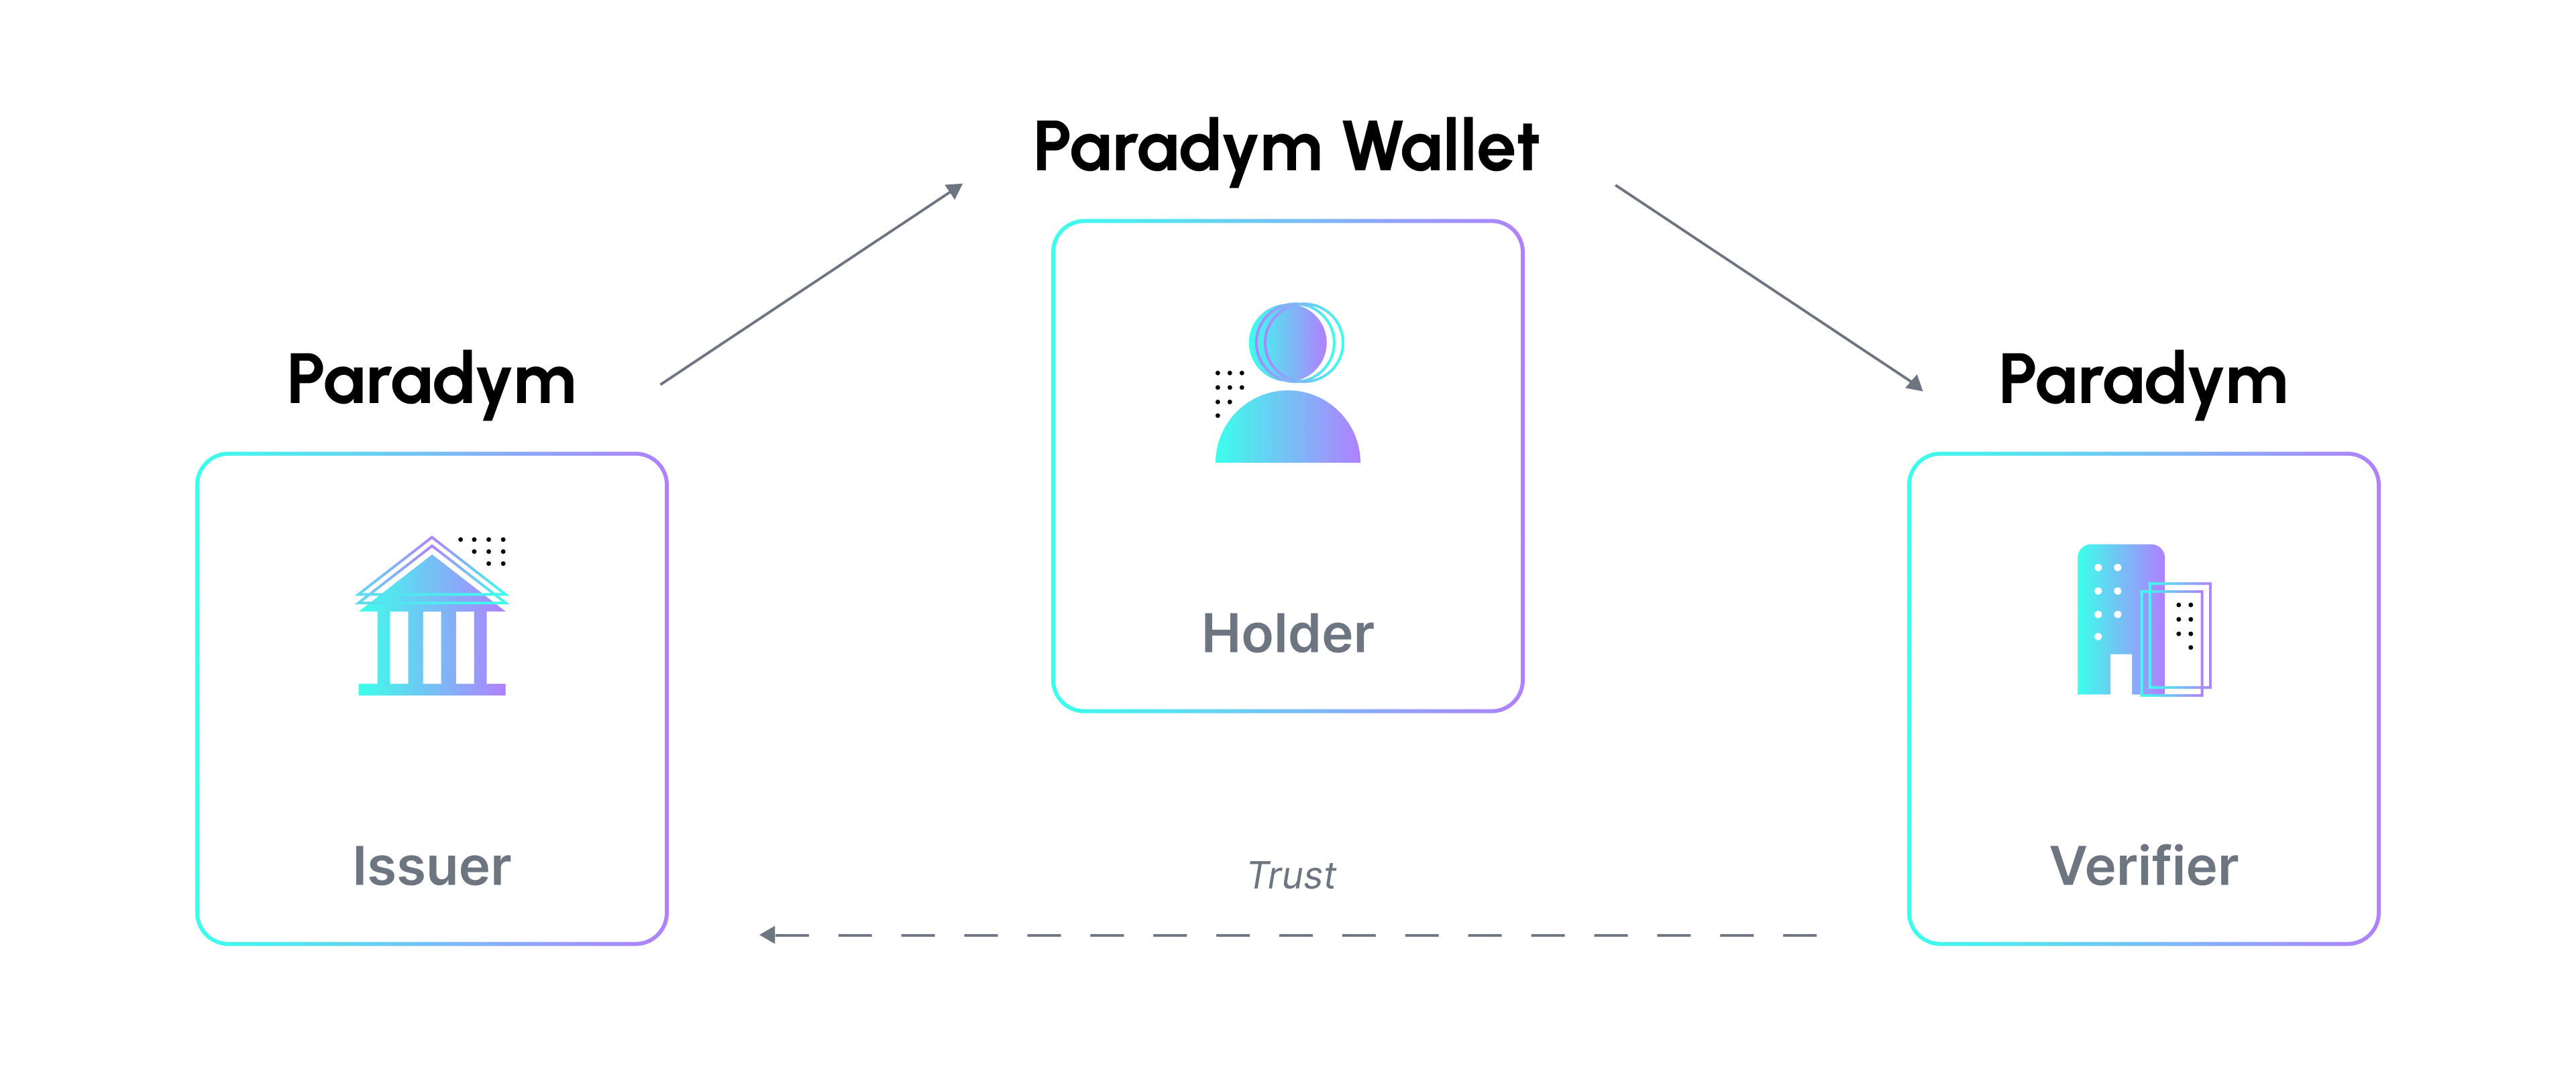 Roles in self-sovereign identity ecosystem, and how it related to Paradym's products.